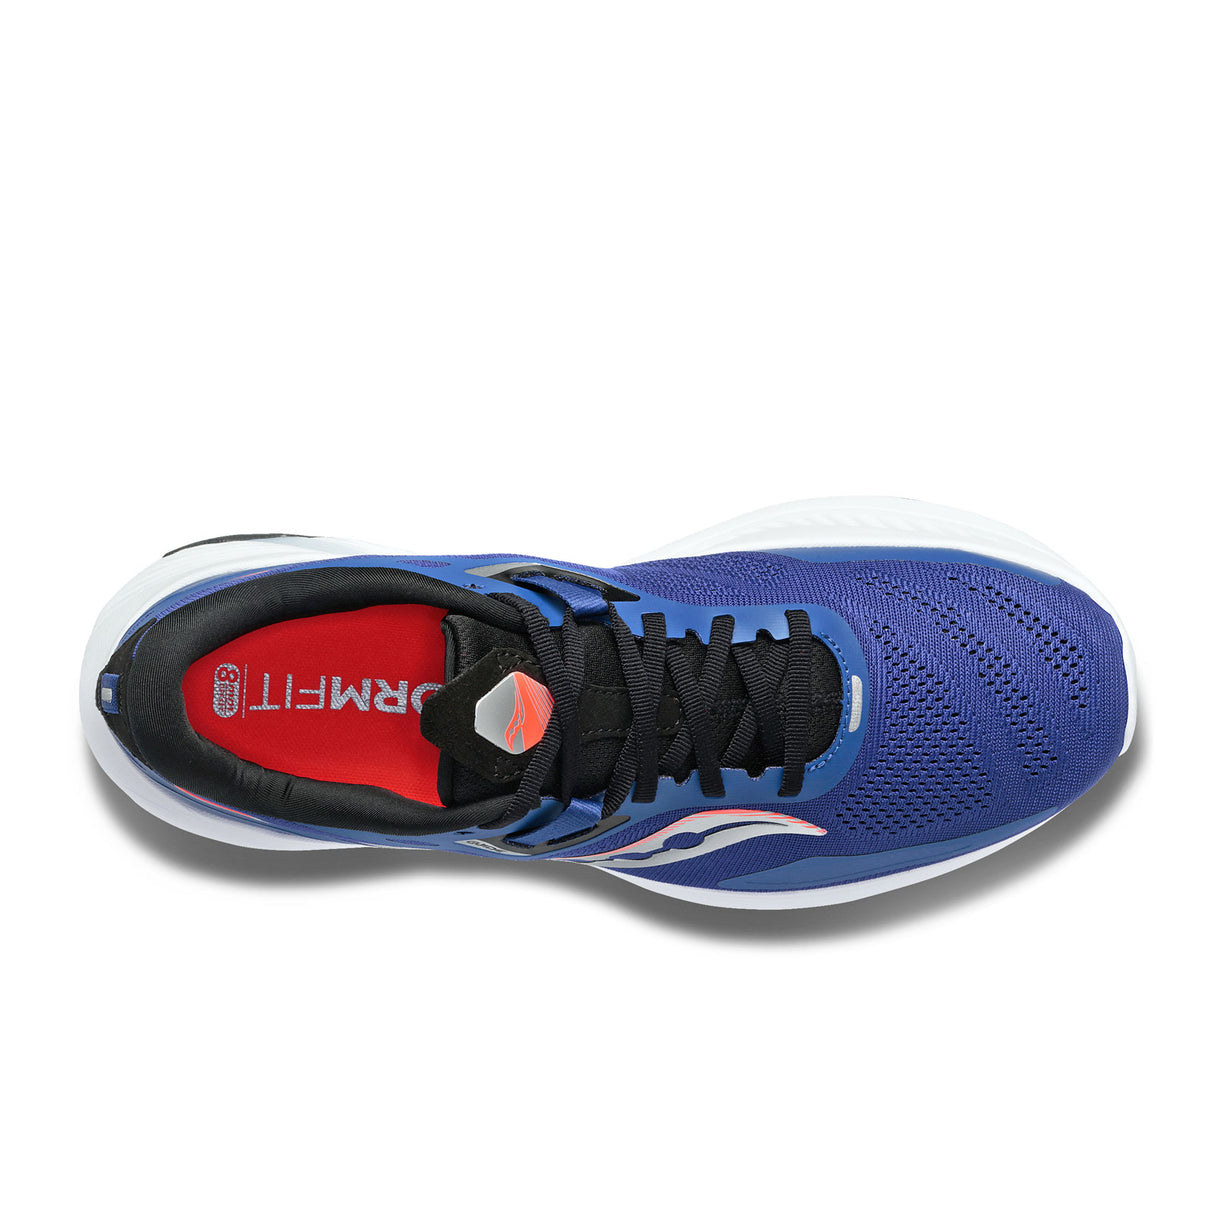 Saucony Guide 15 Running Shoe (Men) - Sapphire/Black Athletic - Running - The Heel Shoe Fitters